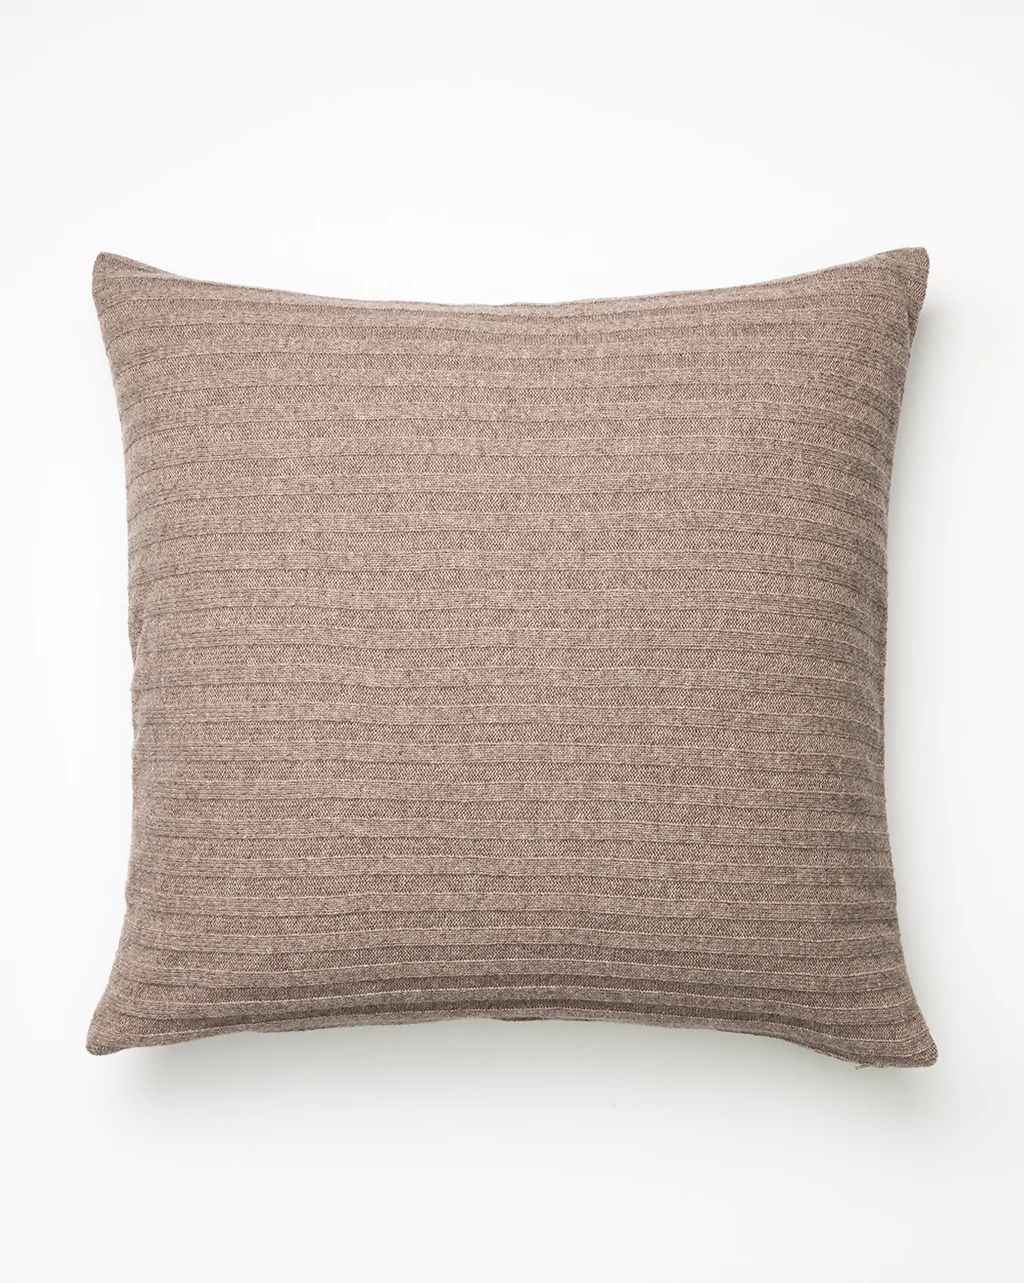 Ribbed Pillow Cover | McGee & Co.